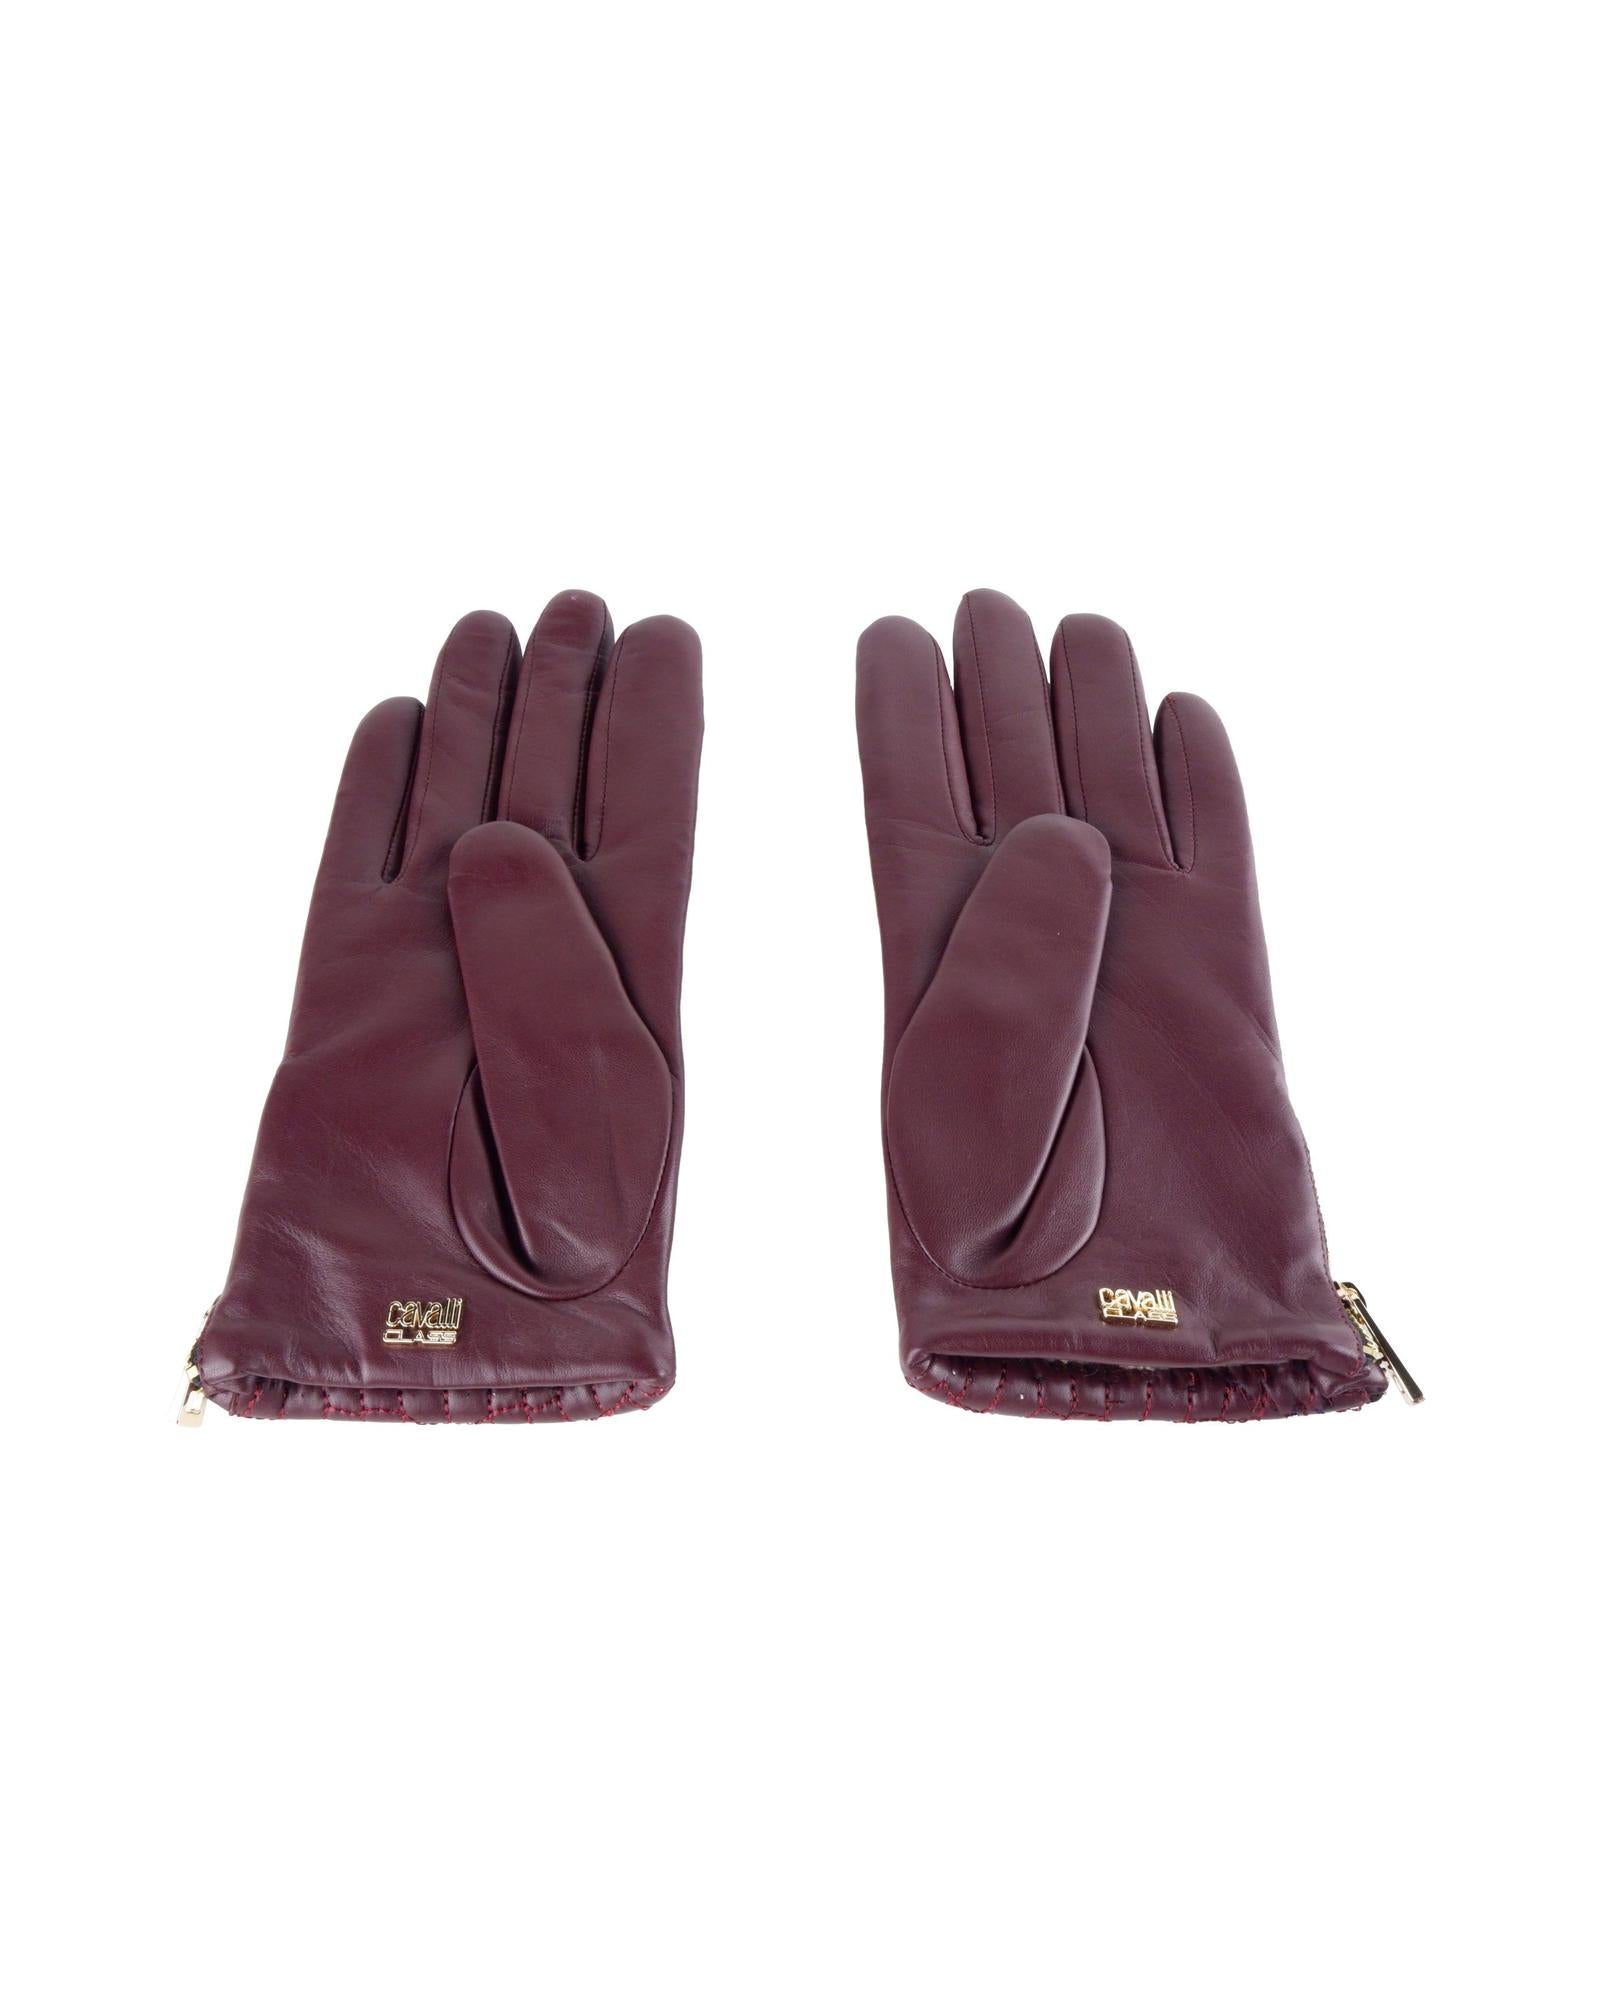 Lady Glove in Red Style CQZ.003 7.5 Women